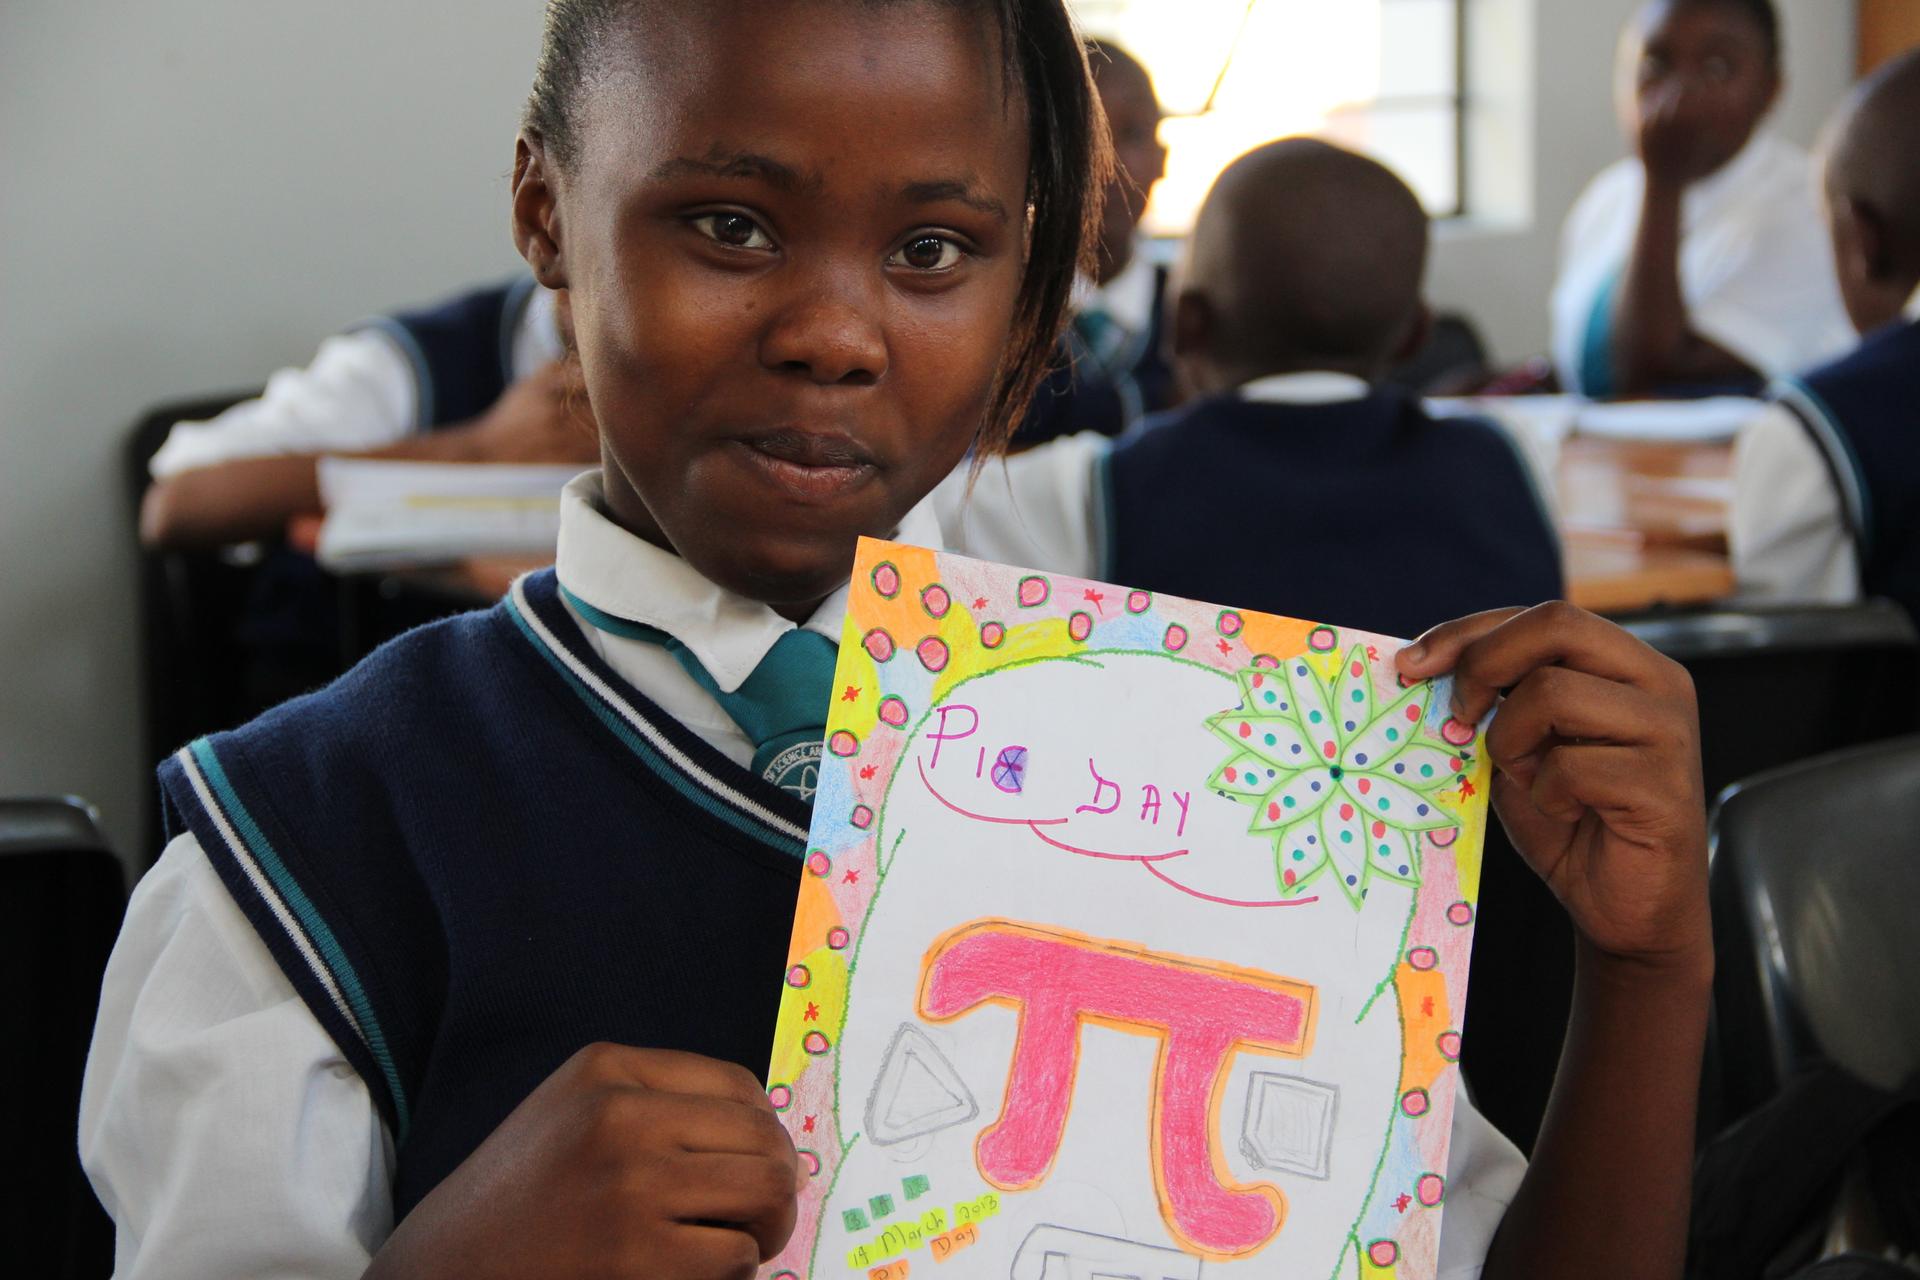 Zizipho, an 8th grade student, displays her Pi Day poster.